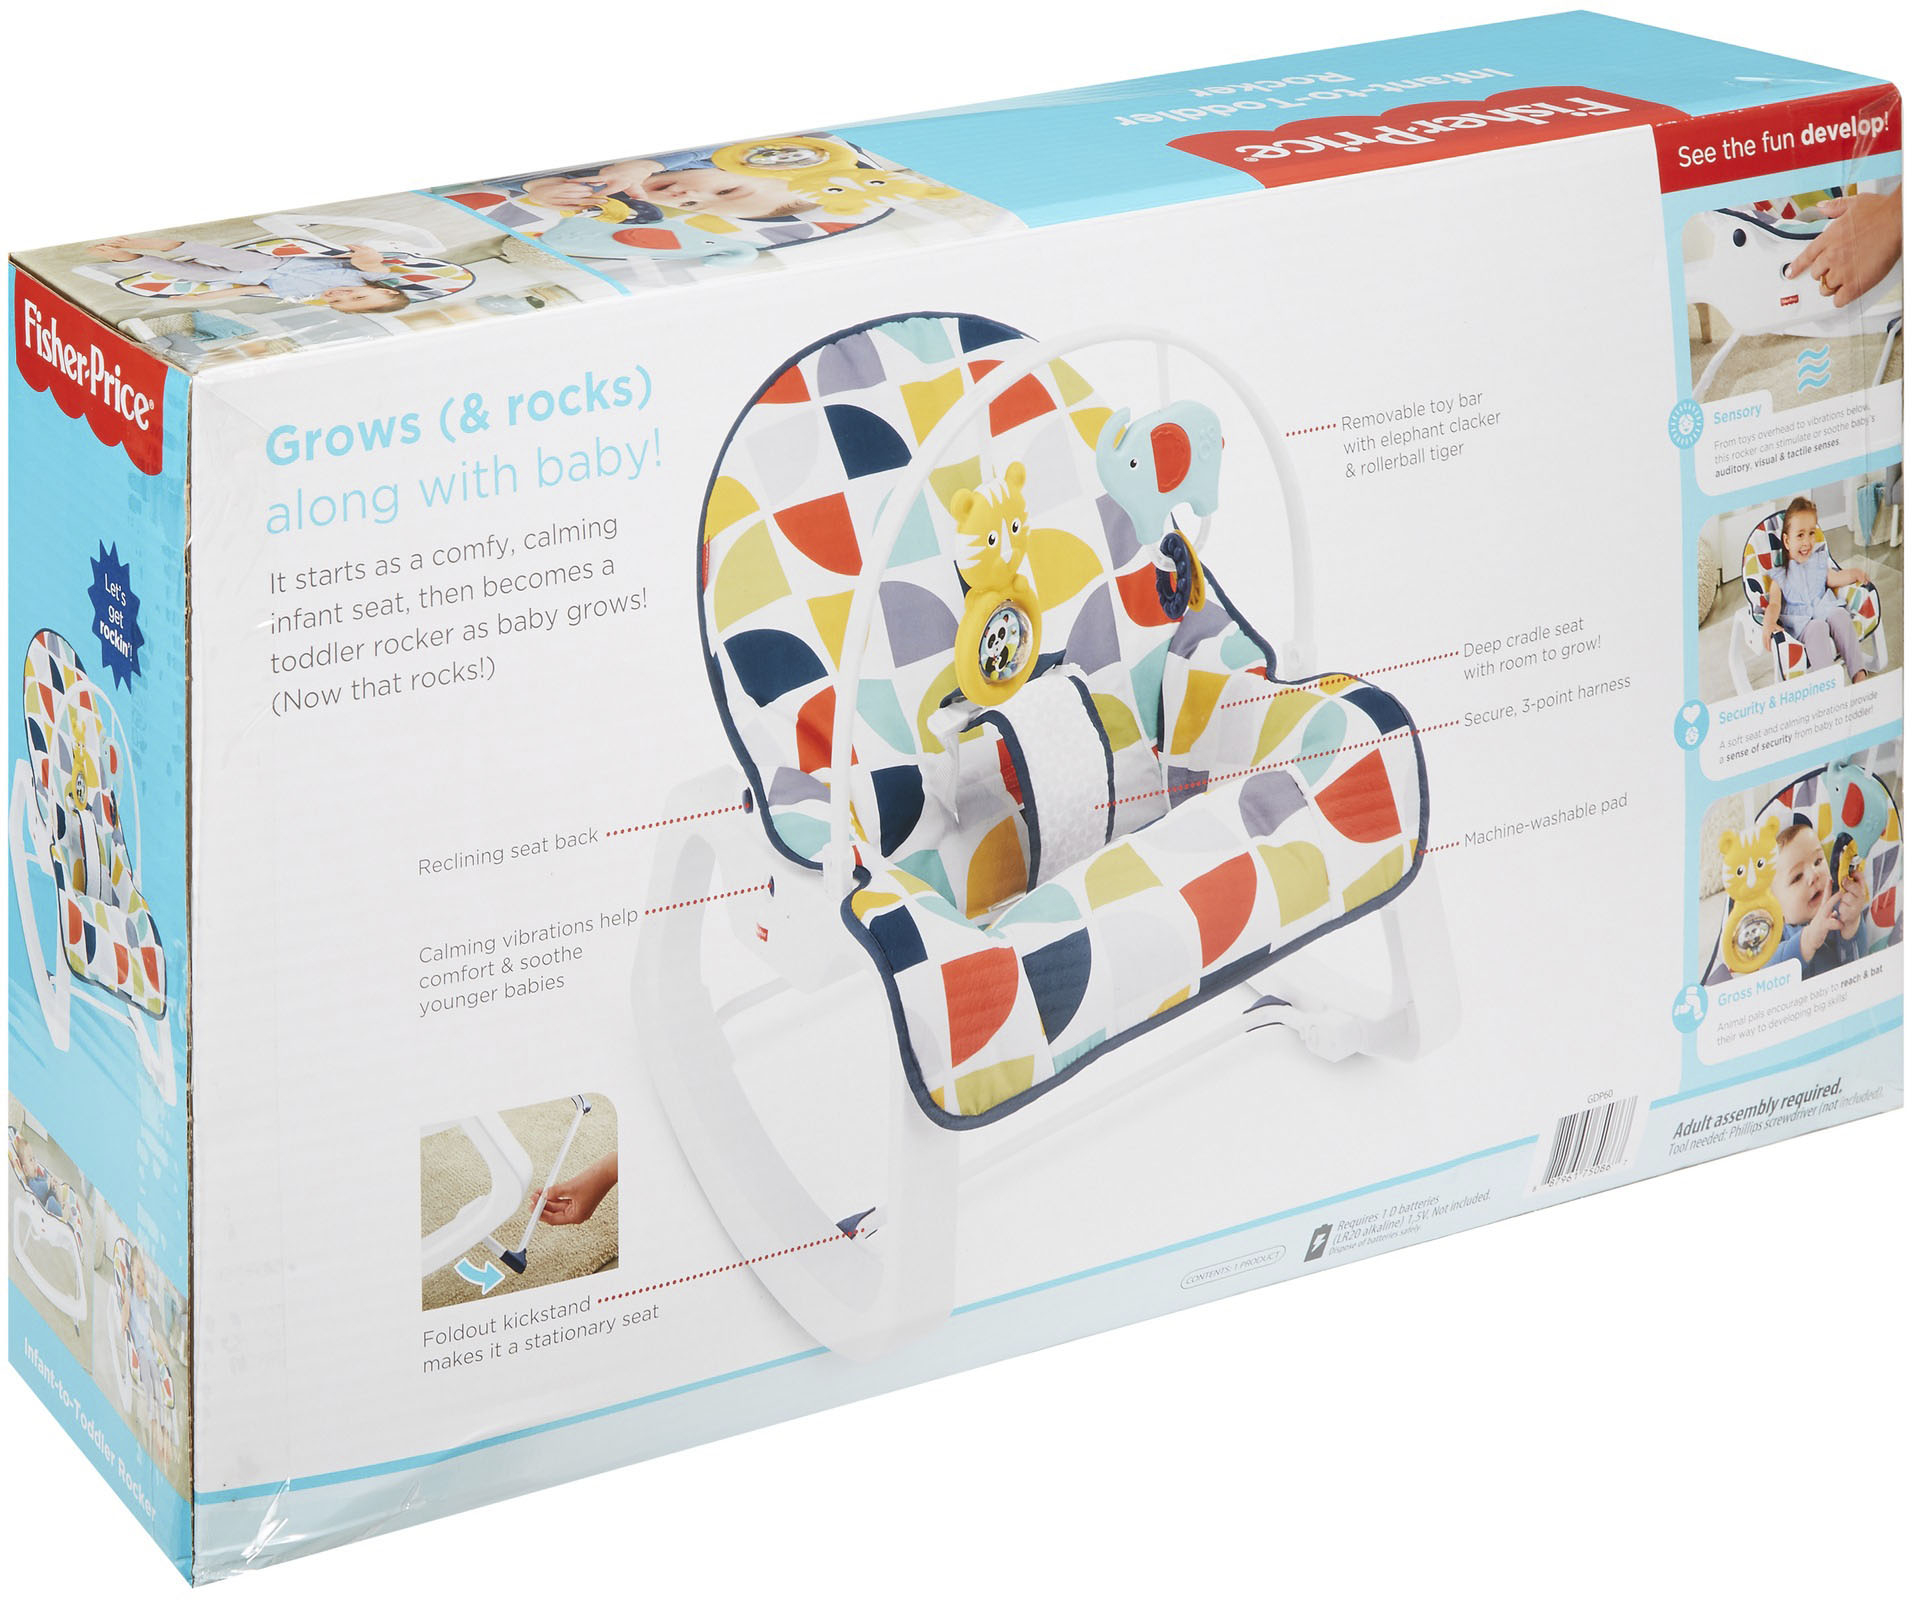 Left View: Fisher Price - Baby Gear - Infant-to-Toddler Rocker Redesign